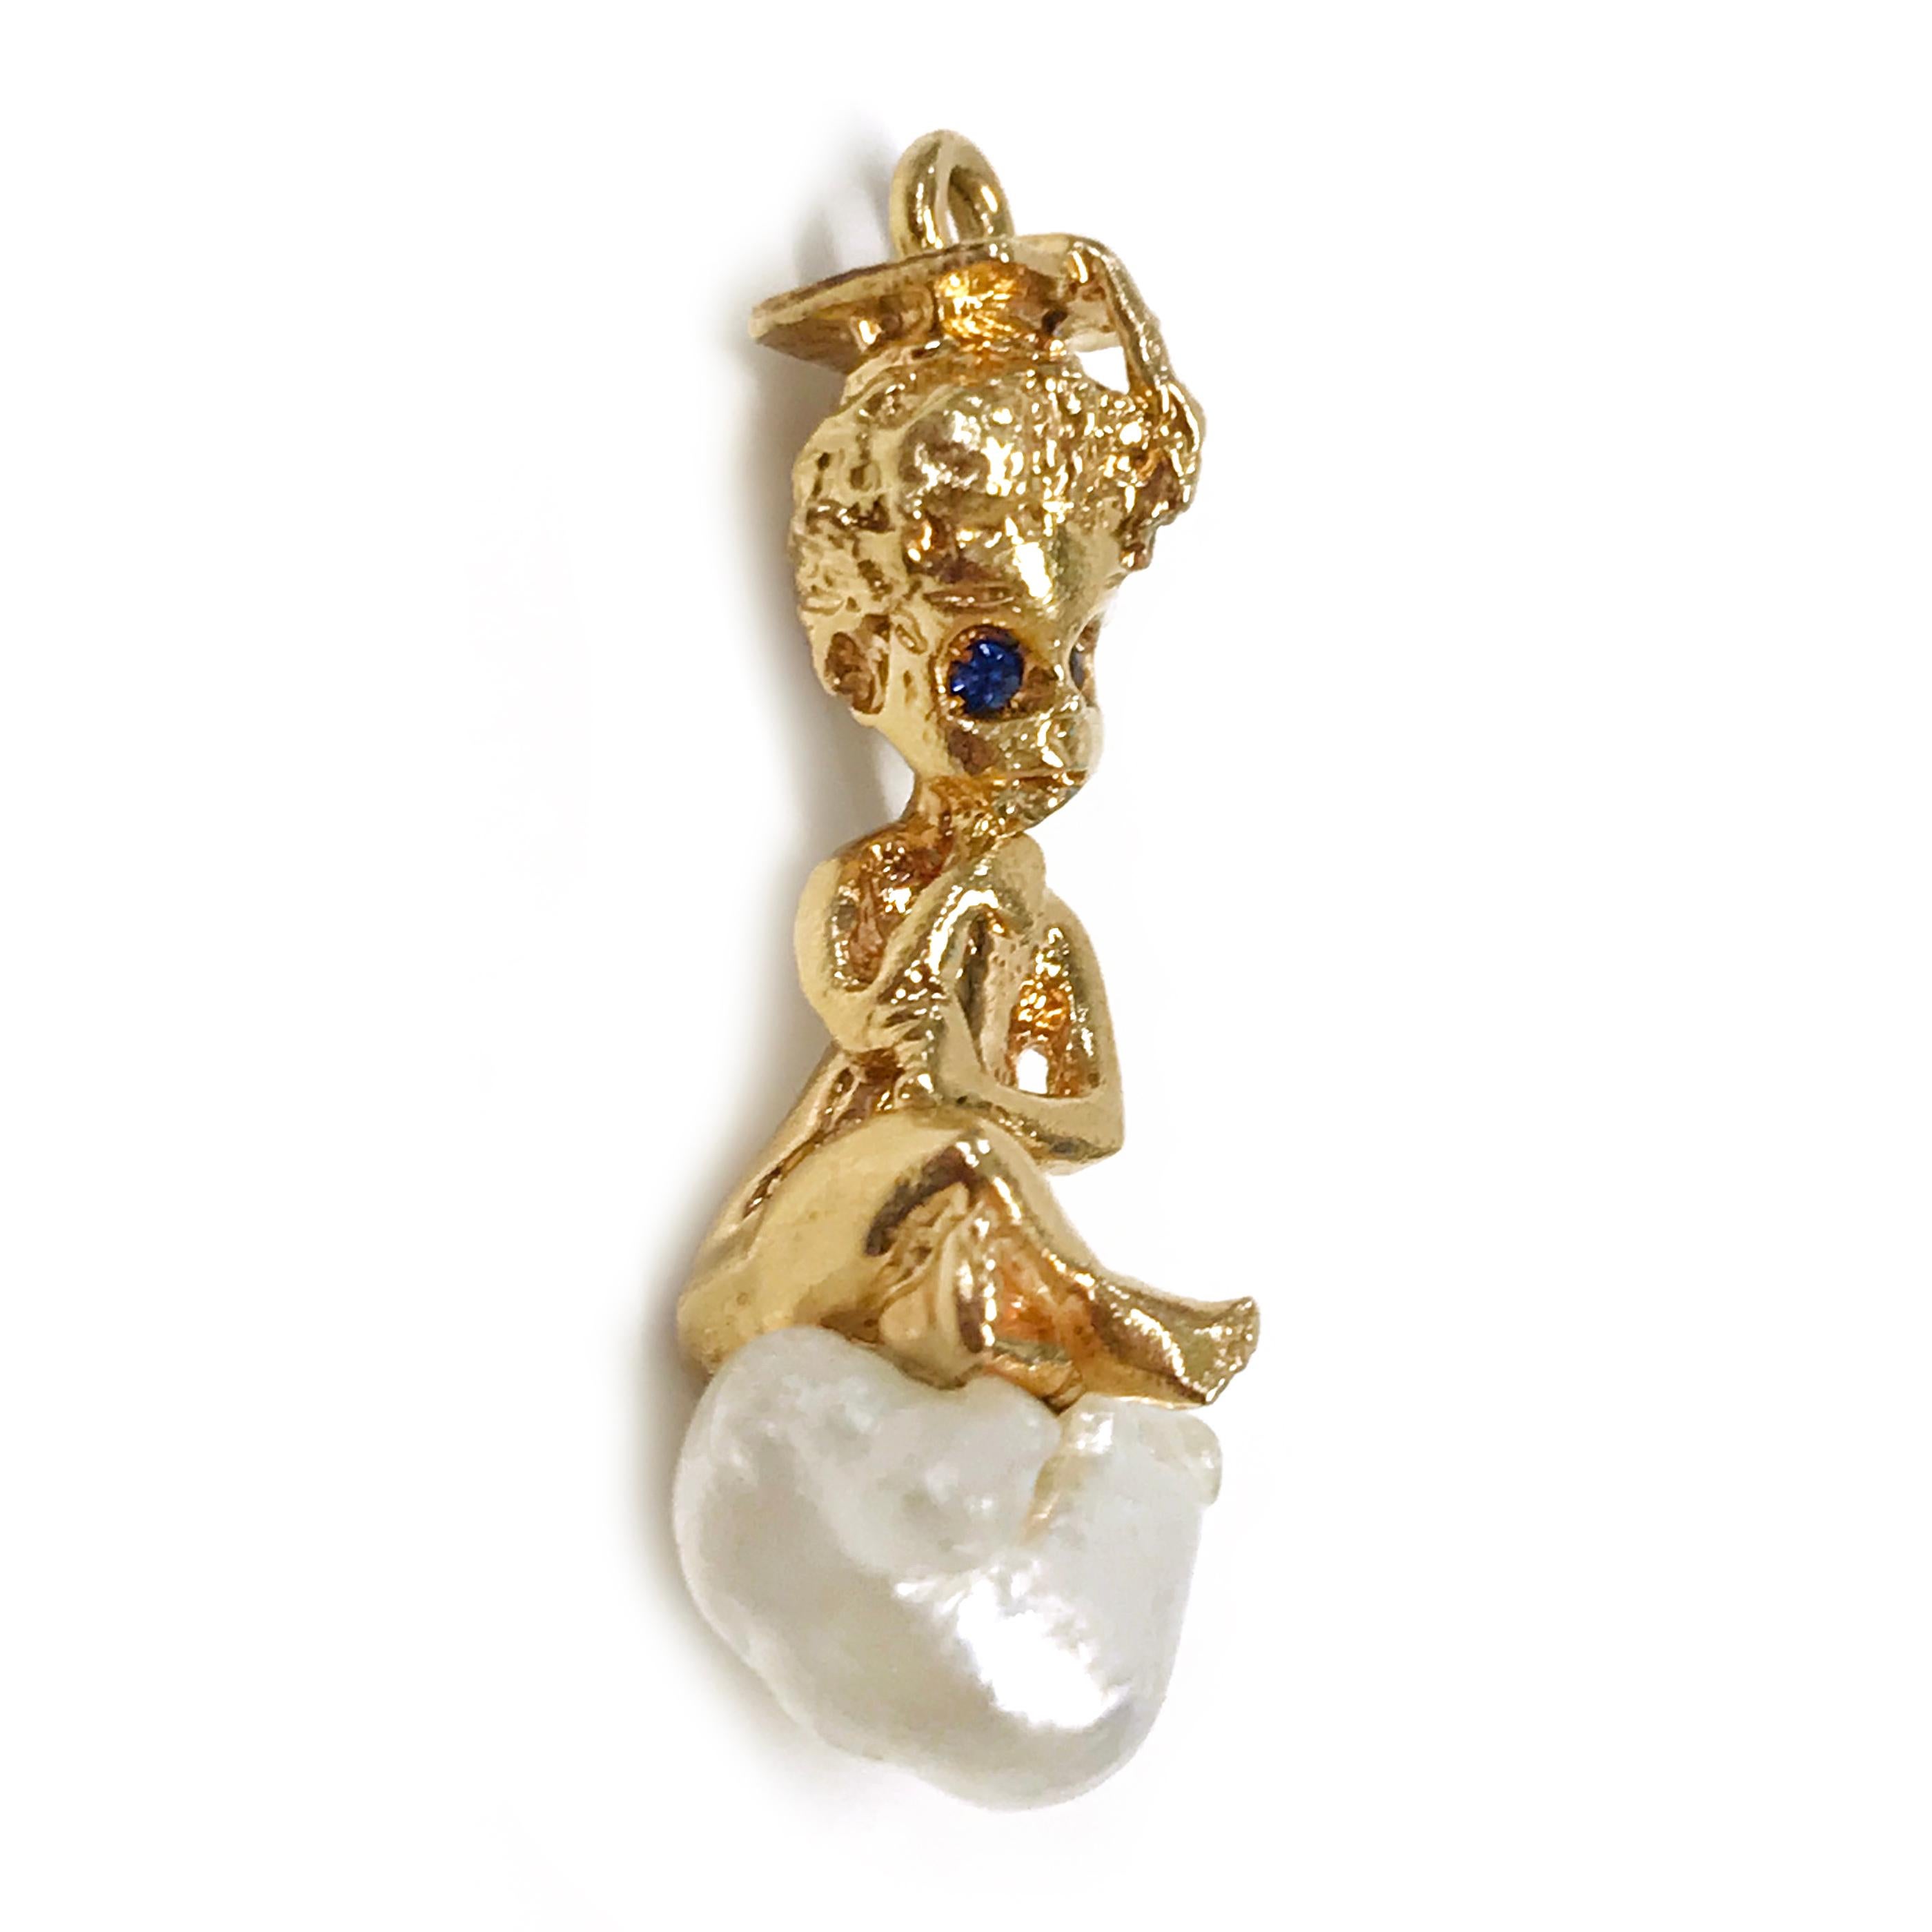 14 Karat Graduation Boy Blue Sapphire Pearl Pendant. This cute little boy is wearing a graduation cap, has blue sapphire eyes, and is sitting on a cloud-shaped Baroque pearl. The overall texture is smooth with detail in the curly hair. The pendant